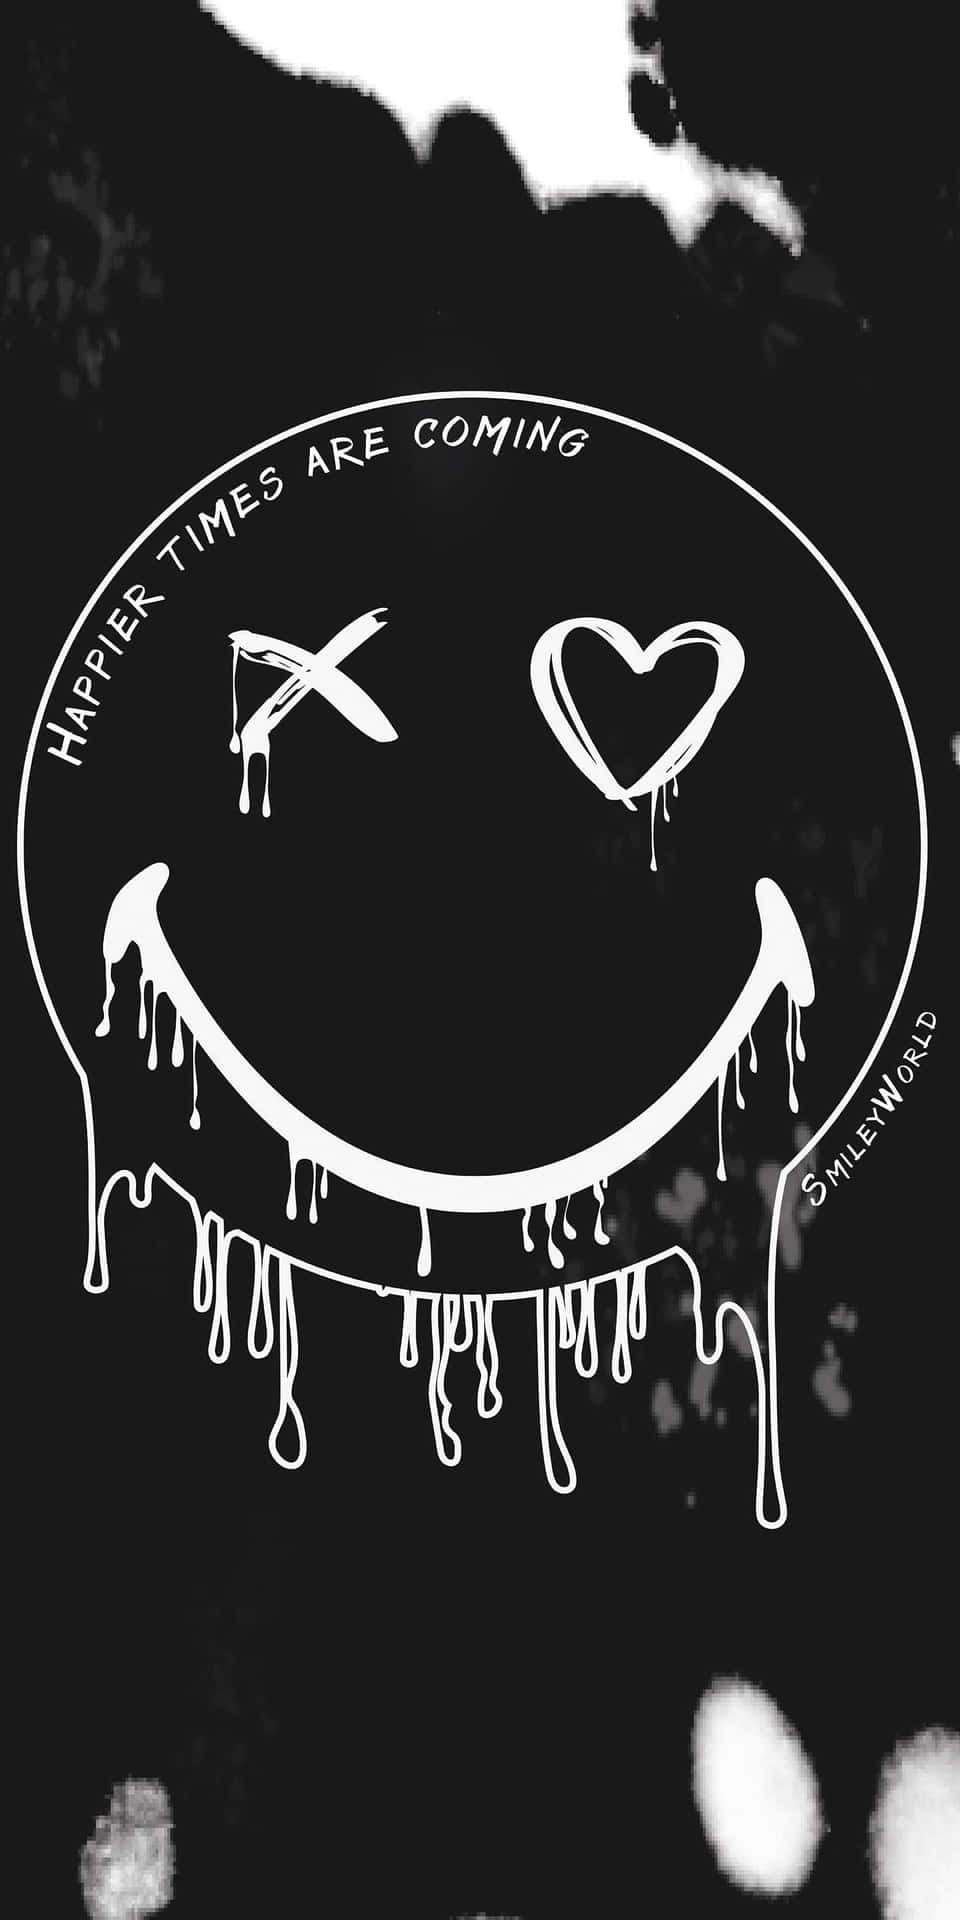 Aesthetic Smiley Face with a Retro Vibe Wallpaper